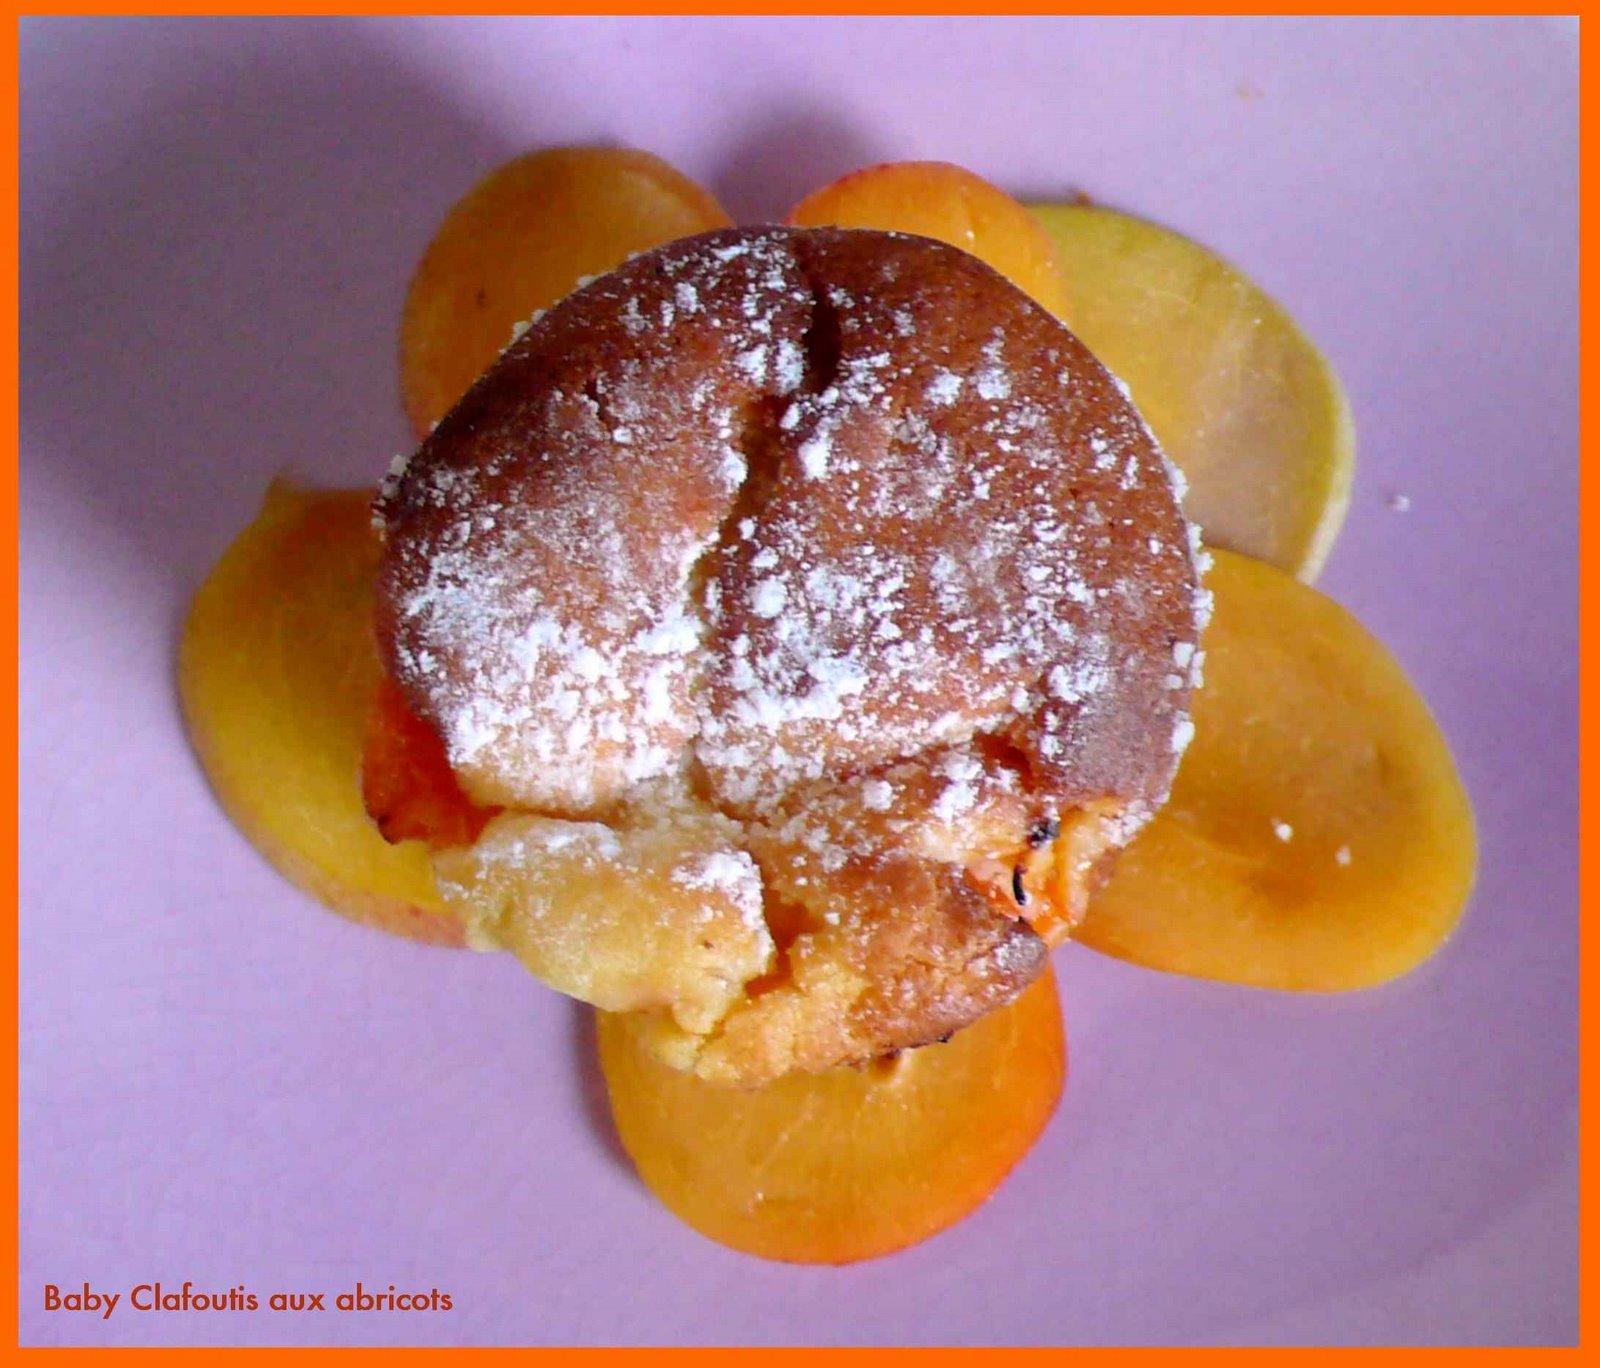 [baby+clafoutis+aux+abricots.jpg]